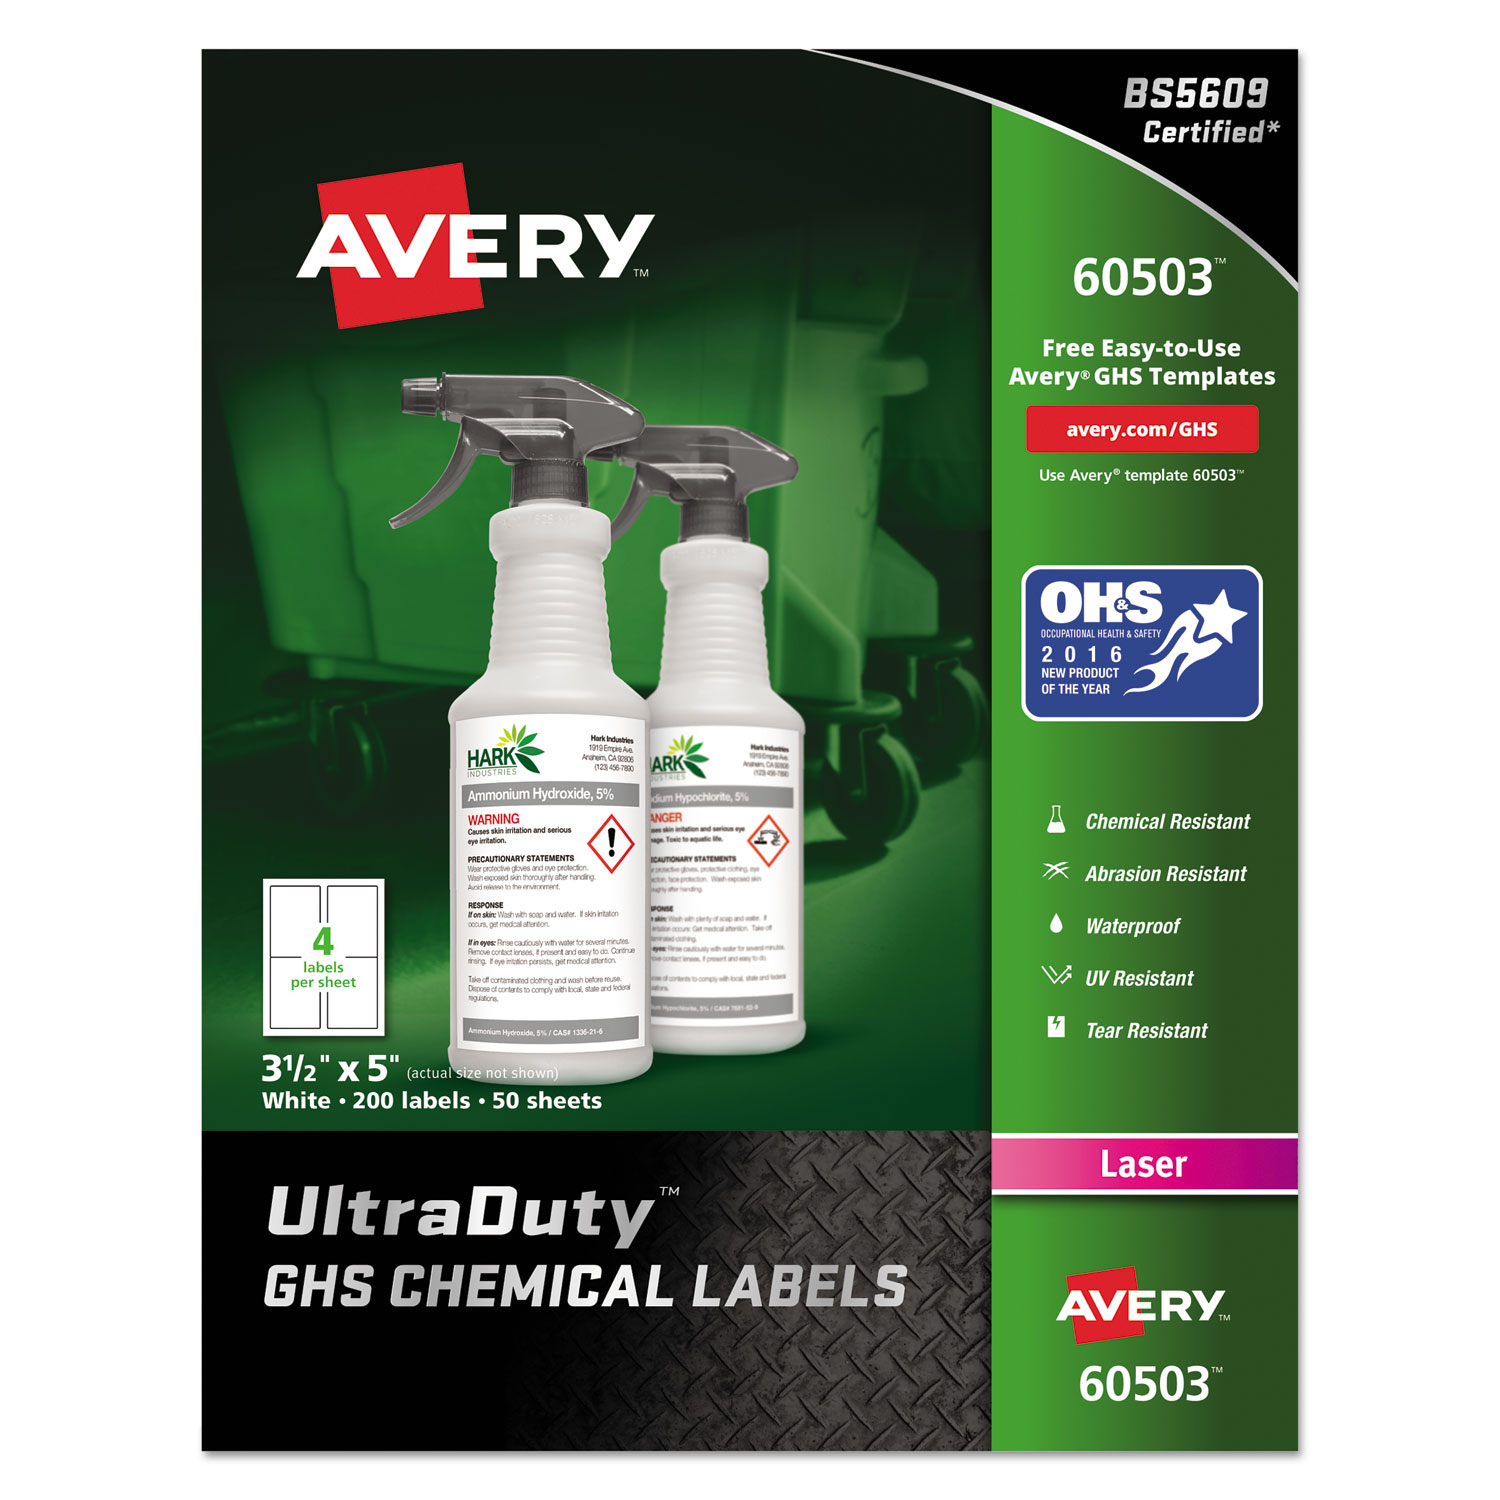  Avery 60503 UltraDuty GHS Chemical Waterproof and UV Resistant Labels, 3.5 x 5, White, 4/Sheet, 50 Sheets/Box (AVE60503) 